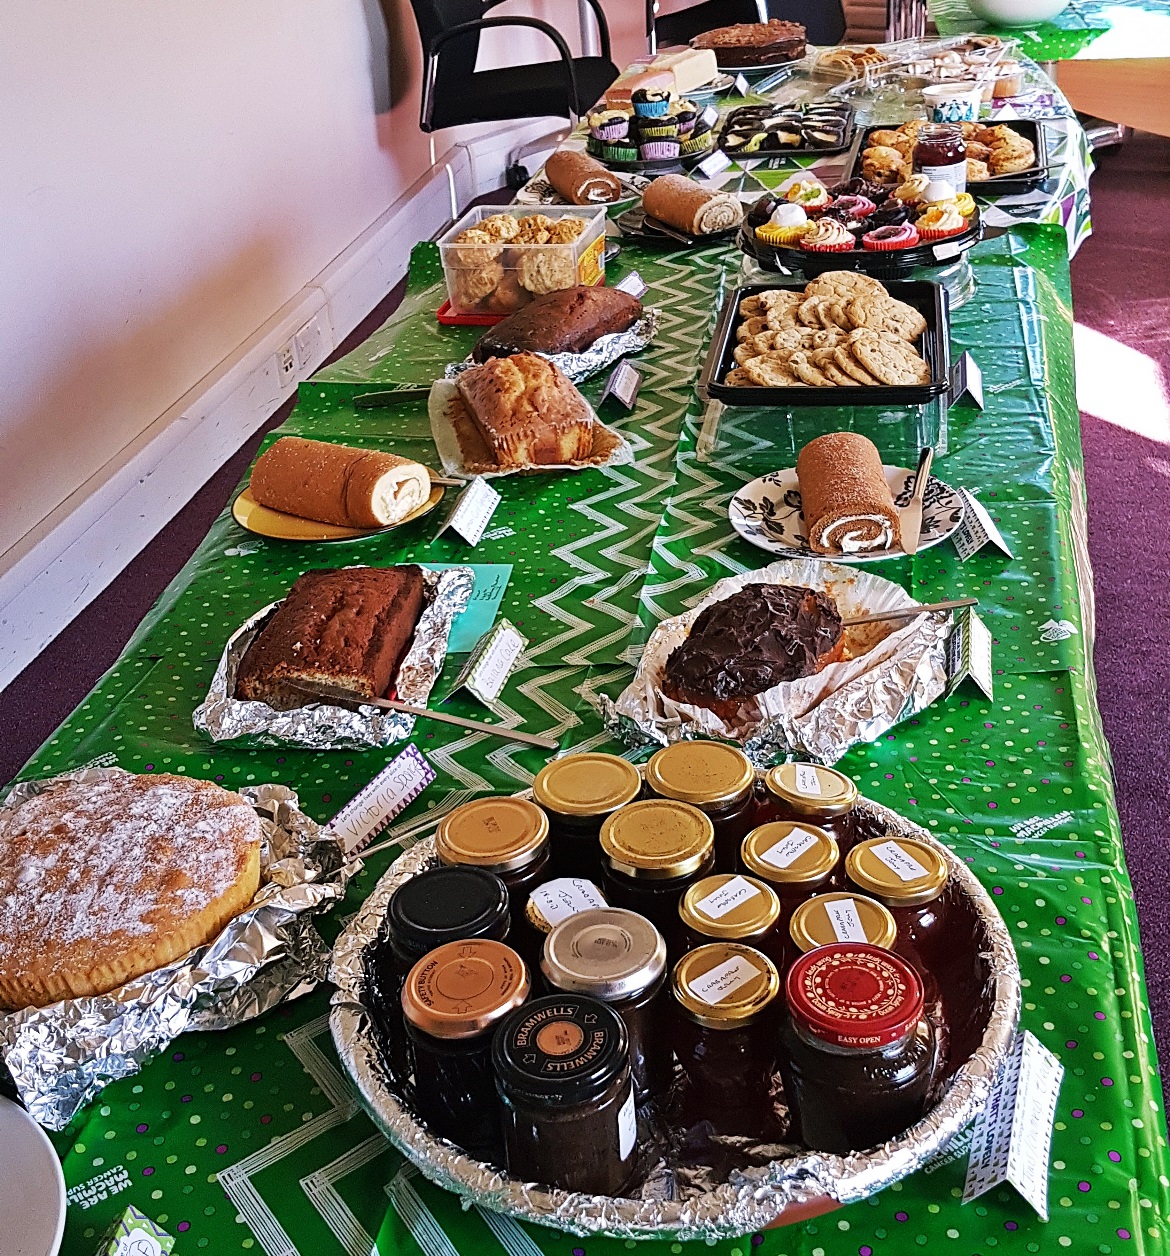 Macmillan Coffee Morning at work - October Monthly Recap by BeckyBecky Blogs